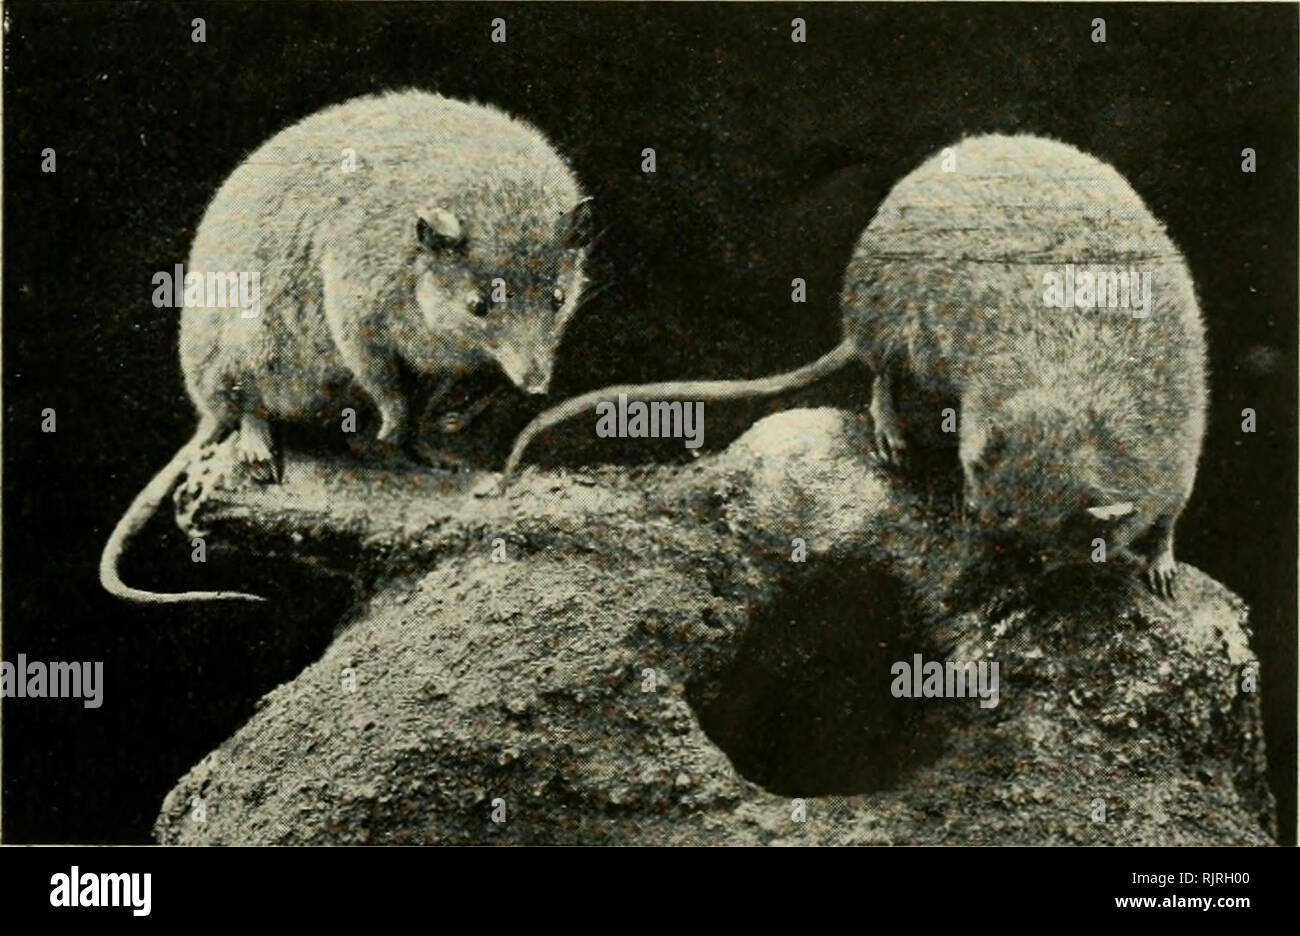 . The Australian Museum magazine. Natural history. Flying Squirrels, marsupial and placental. Both have membranes between their limbs to enable them to take long flying leaps from tree to tree. But though so similar in appearance the Australian form (left) has no af&amp;nity with the American (right). Photo.—G. C. Clutton. ance be classed with the beaver; it has form an arc with the lower jaw. More- the same stocky build and both are good over, in both these teeth lack roots, so gnawers and diggers. Comparing their that they grow continuously throughout skulls we find that in both the front th Stock Photo